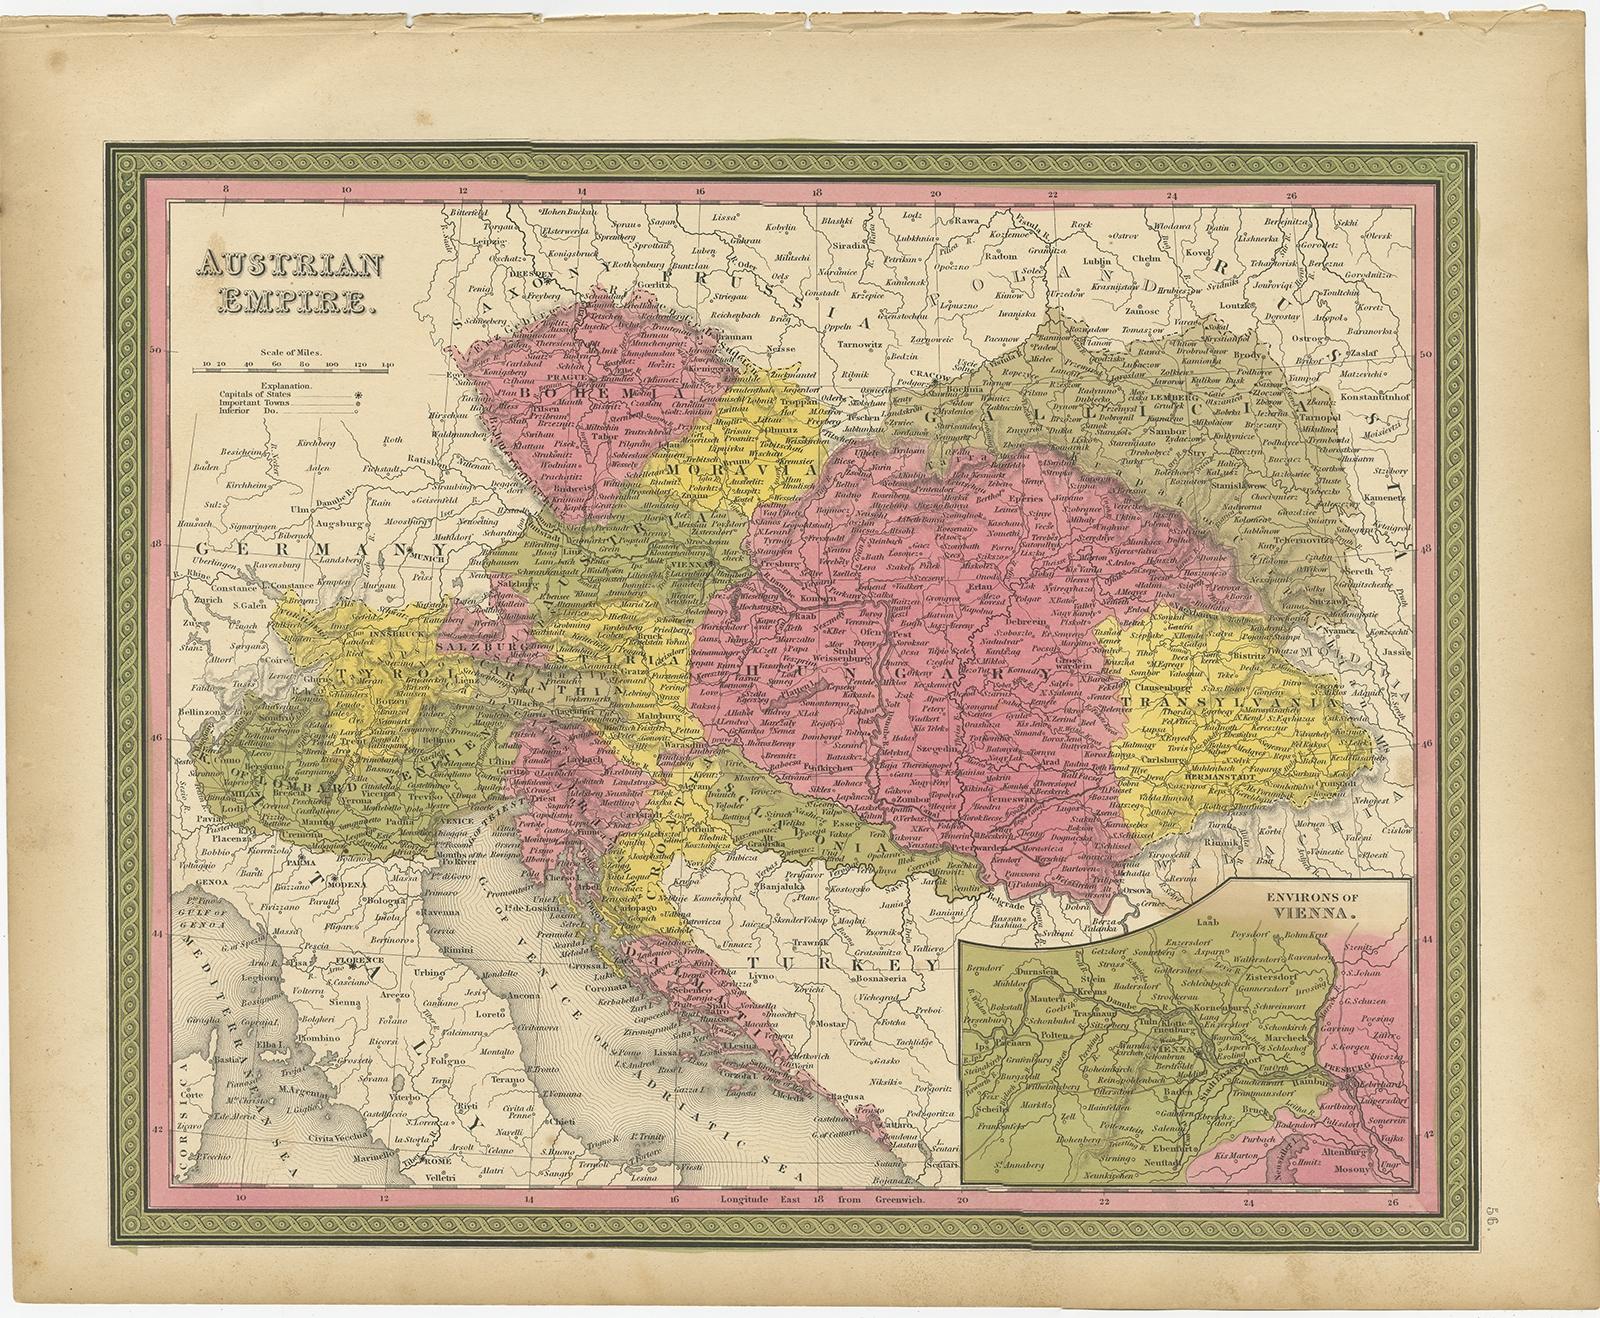 Antique map titled 'Austrian Empire'. 

Old map of the Austrian Empire, with an inset map of Vienna. This map originates from 'A New Universal Atlas Containing Maps of the various Empires, Kingdoms, States and Republics Of The World (..) by S.A.